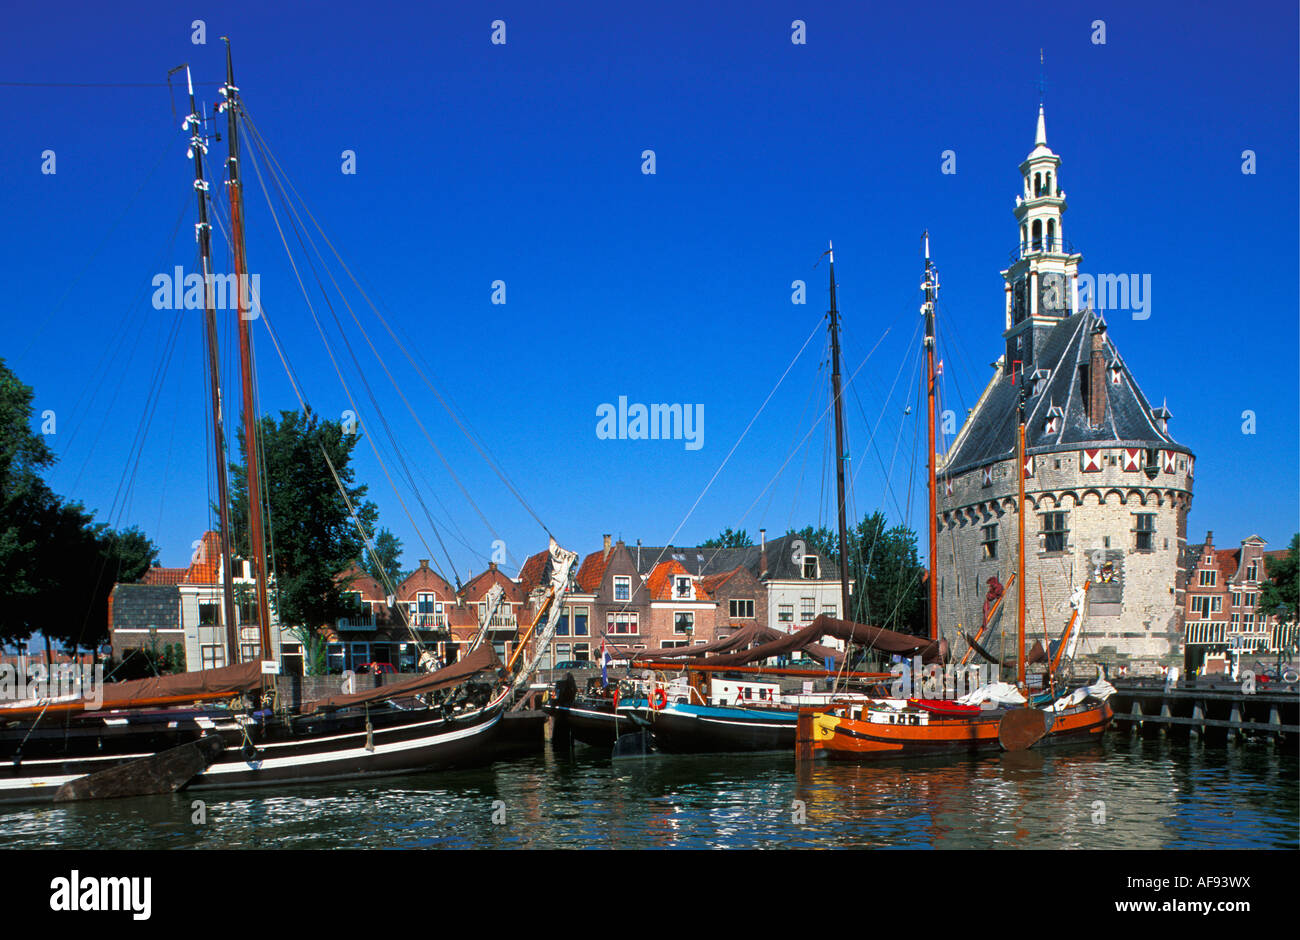 verdieping Tact Per ongeluk Hoorn Netherlands High Resolution Stock Photography and Images - Alamy